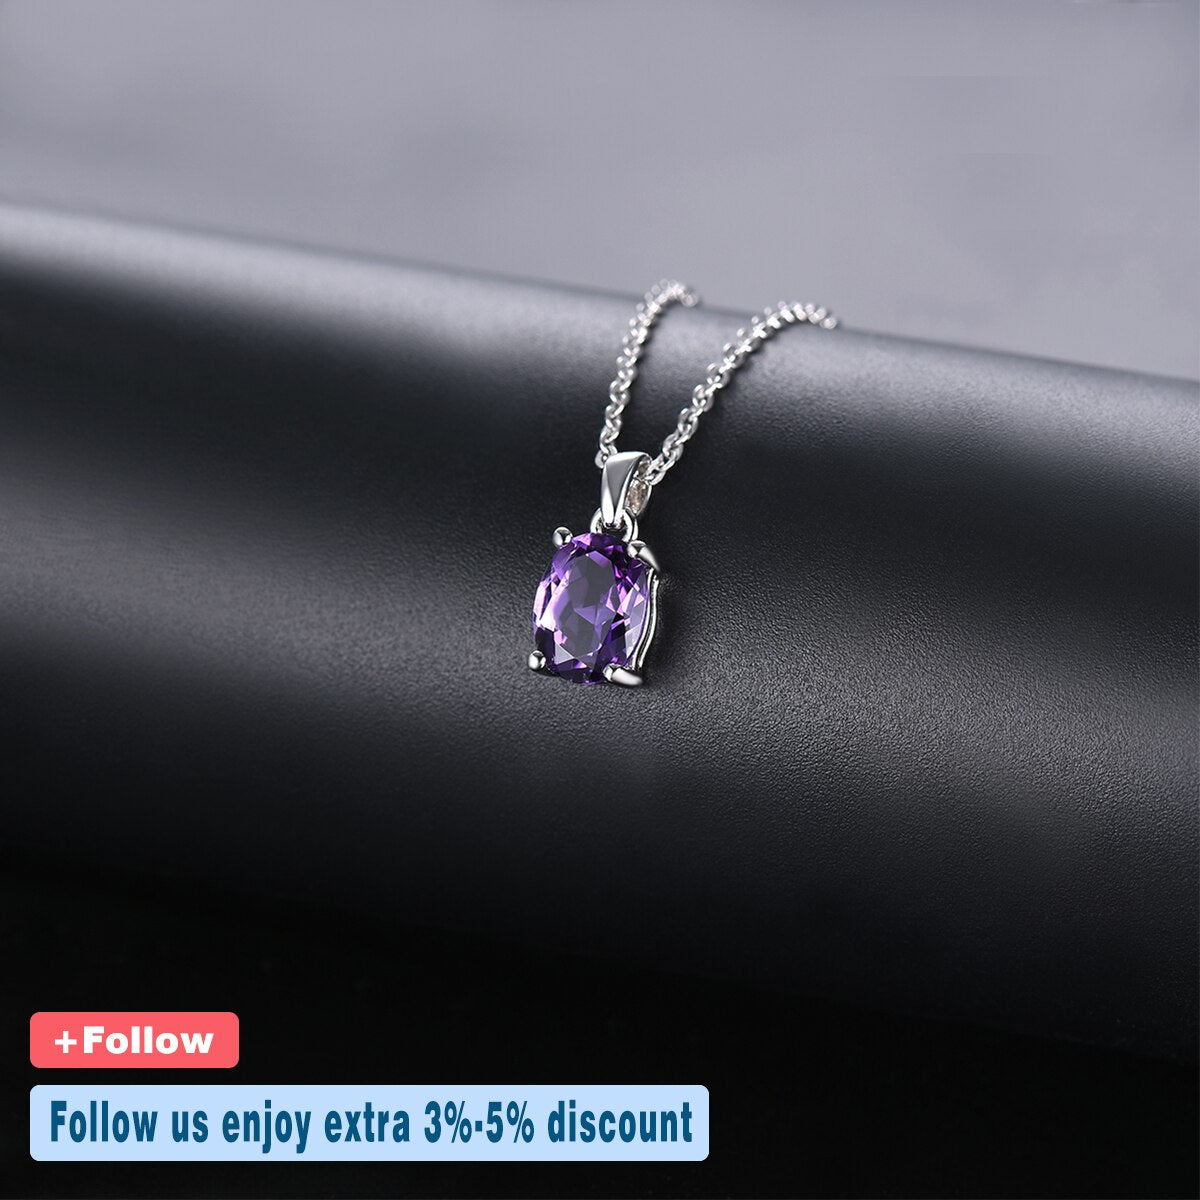 Hutang Amethyst Solid 925 Sterling Silver Pendant Real Oval 8x6mm Purple Gemstone 925 Silver Chain Fine Fashion Simple Jewelry